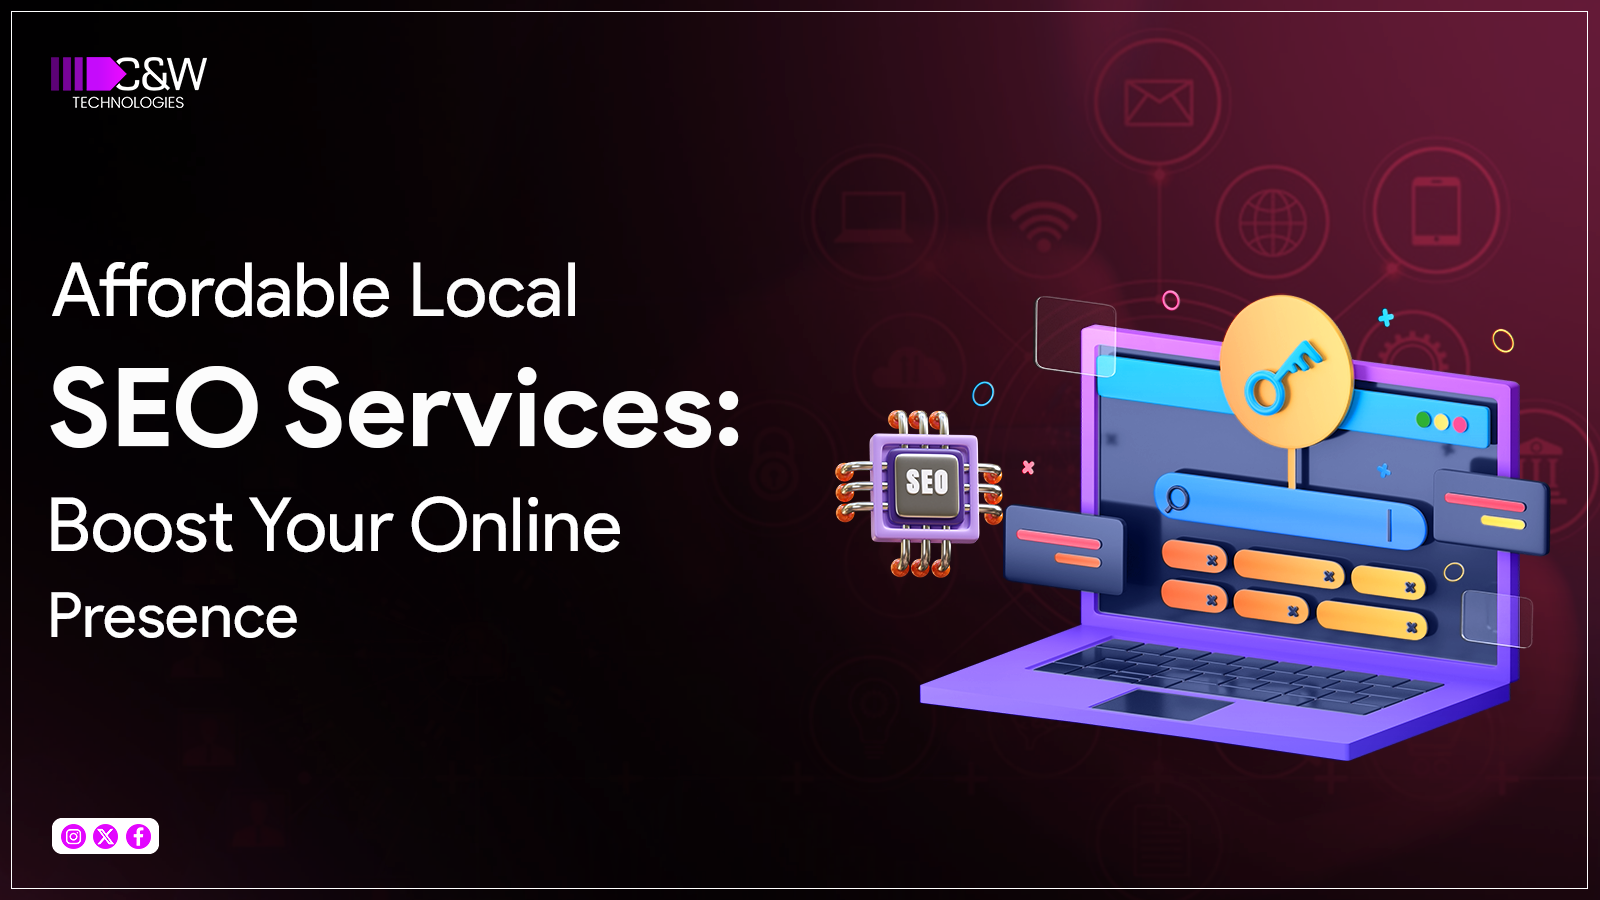 Affordable Local SEO Services: Boost Your Online Presence